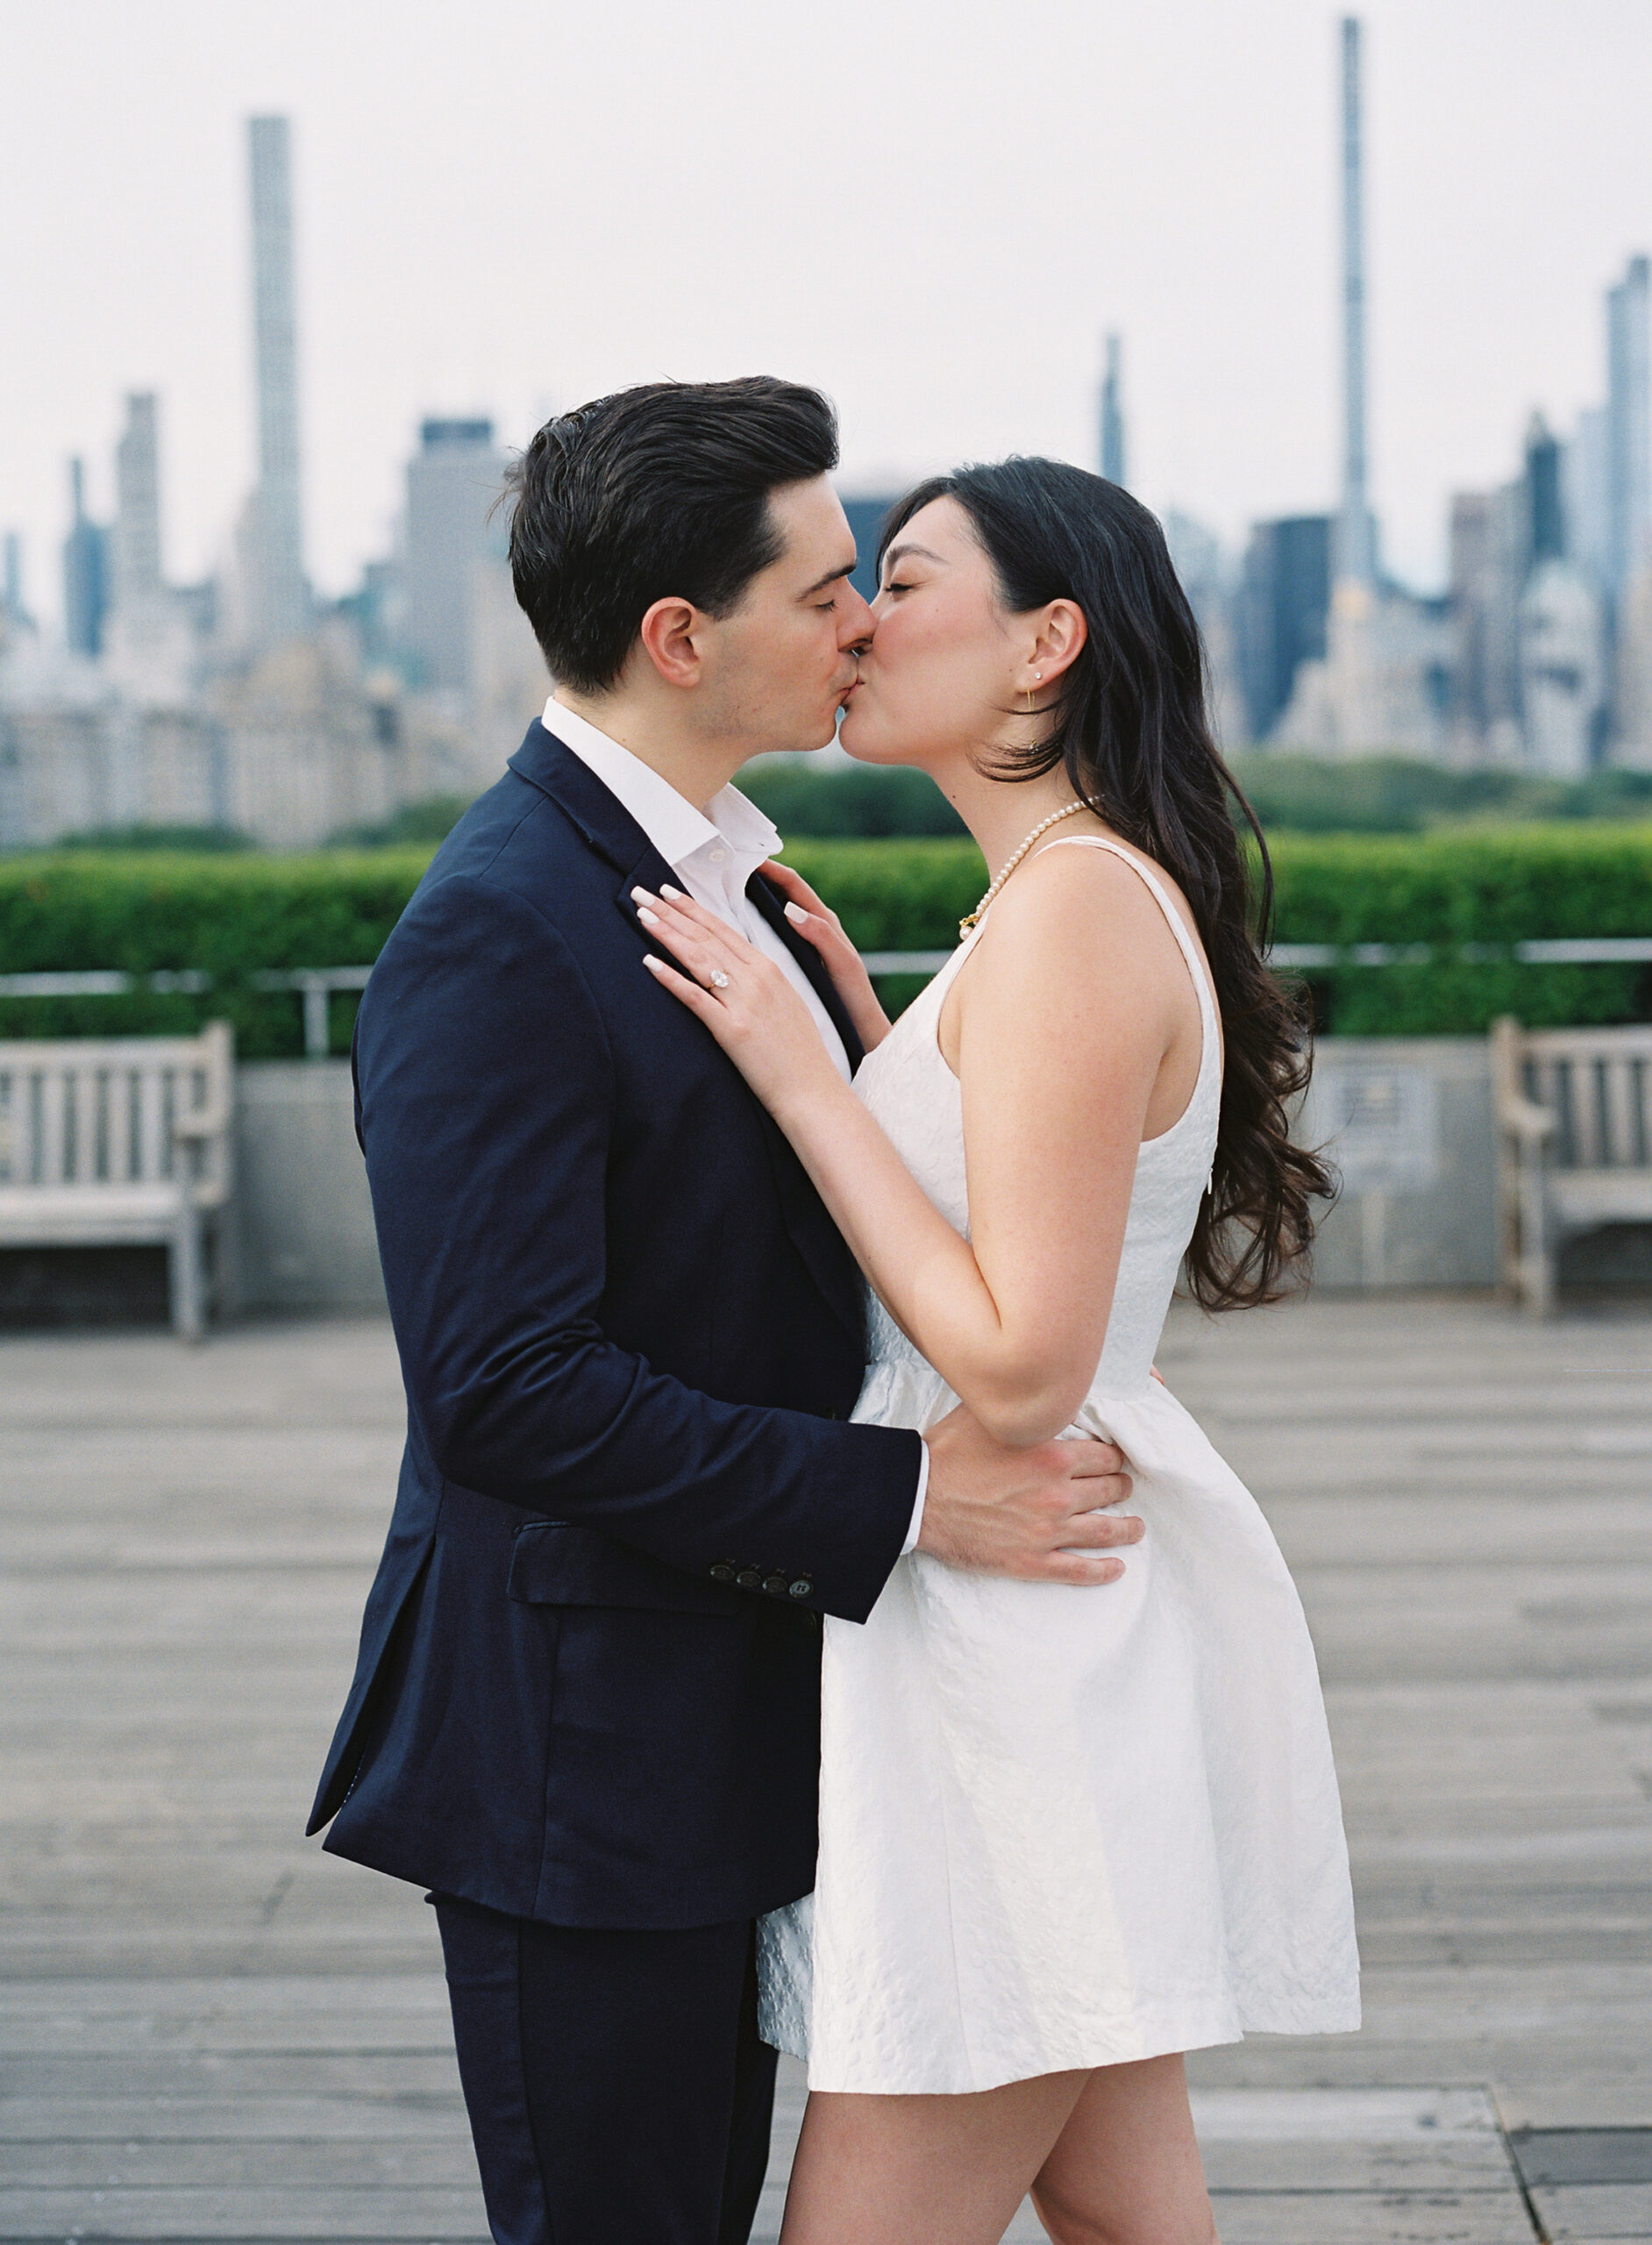 Metropolitan Museum of Art Engagement, NYC Engagement Photographer, Anna Gianfrate Photography